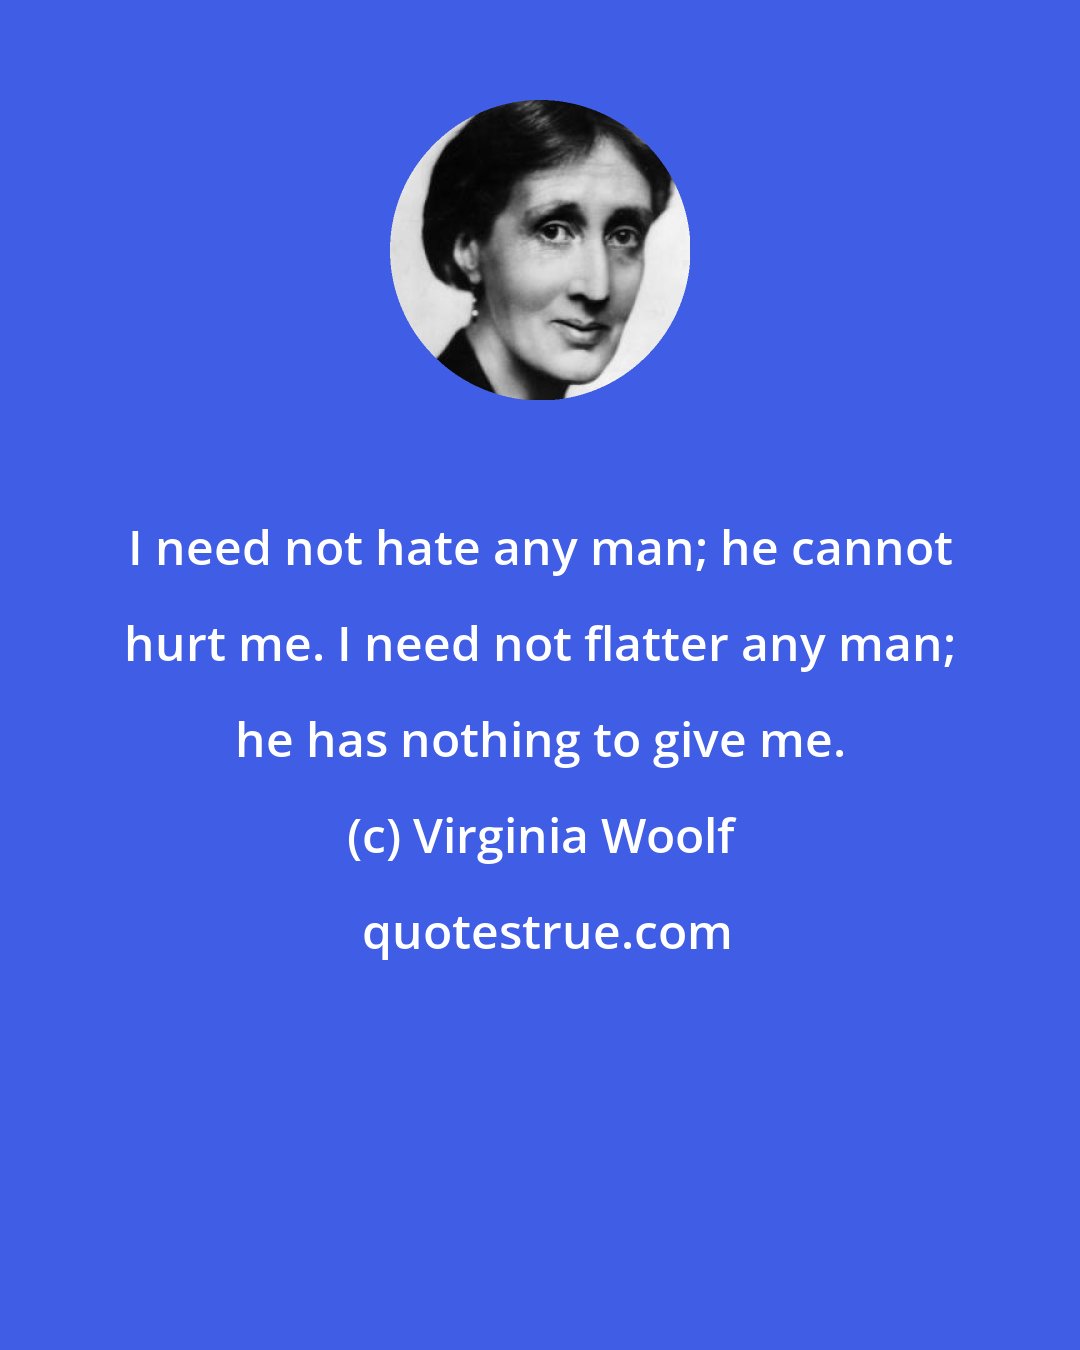 Virginia Woolf: I need not hate any man; he cannot hurt me. I need not flatter any man; he has nothing to give me.